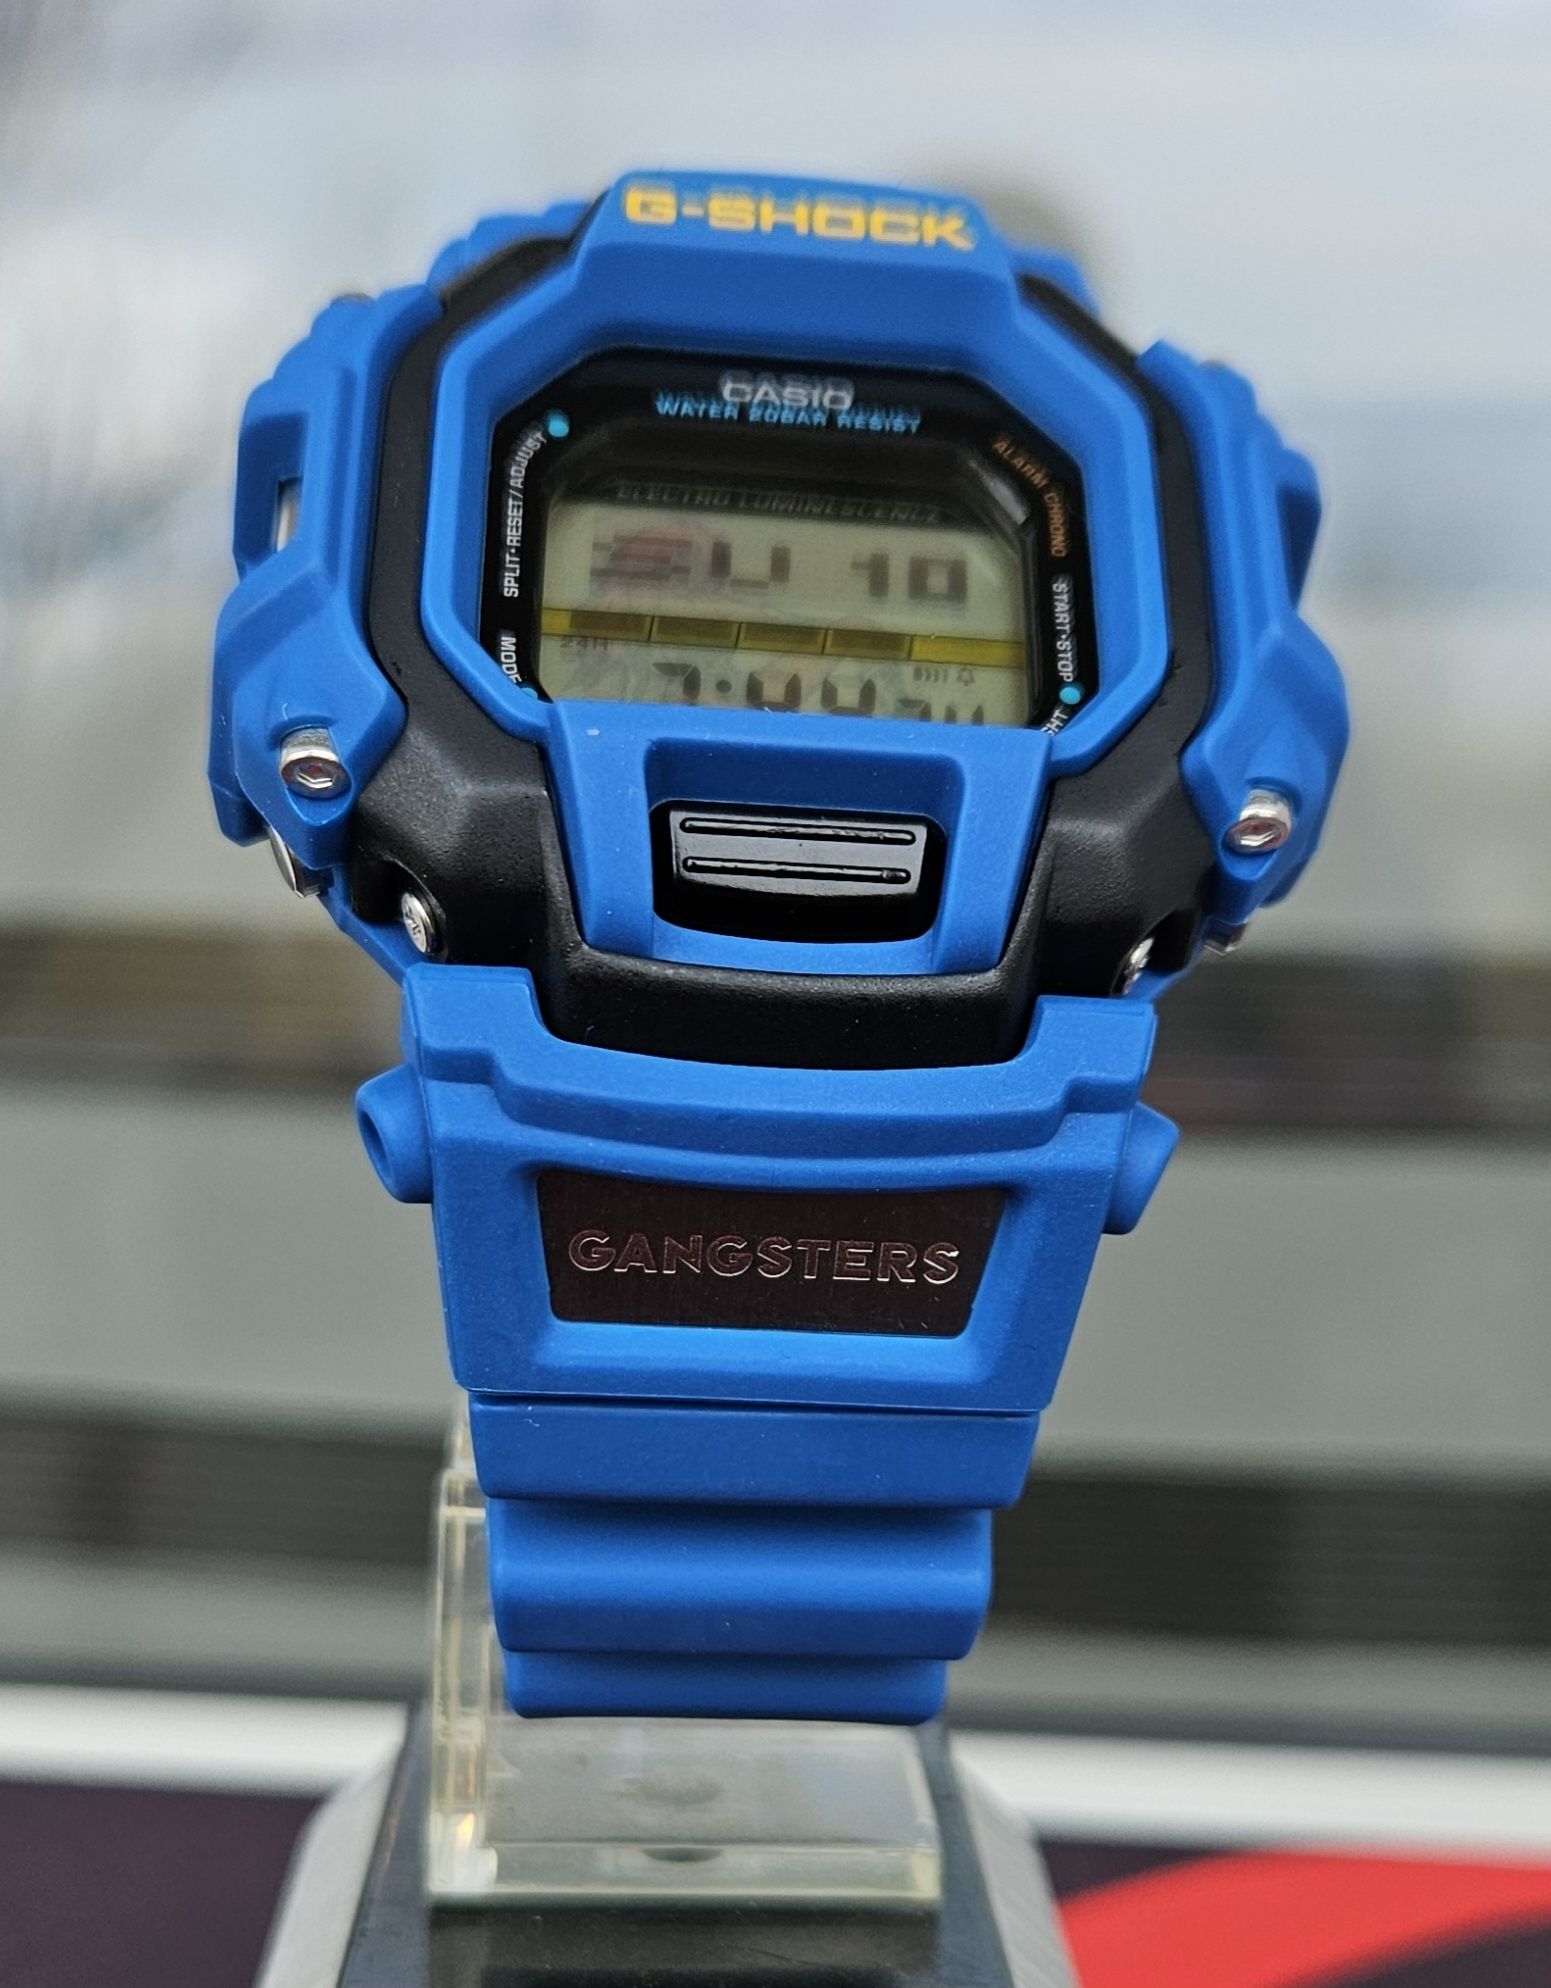 DW-8195 Gangsters Sexy Girl blue Vintage-G Casio G-shock 1995